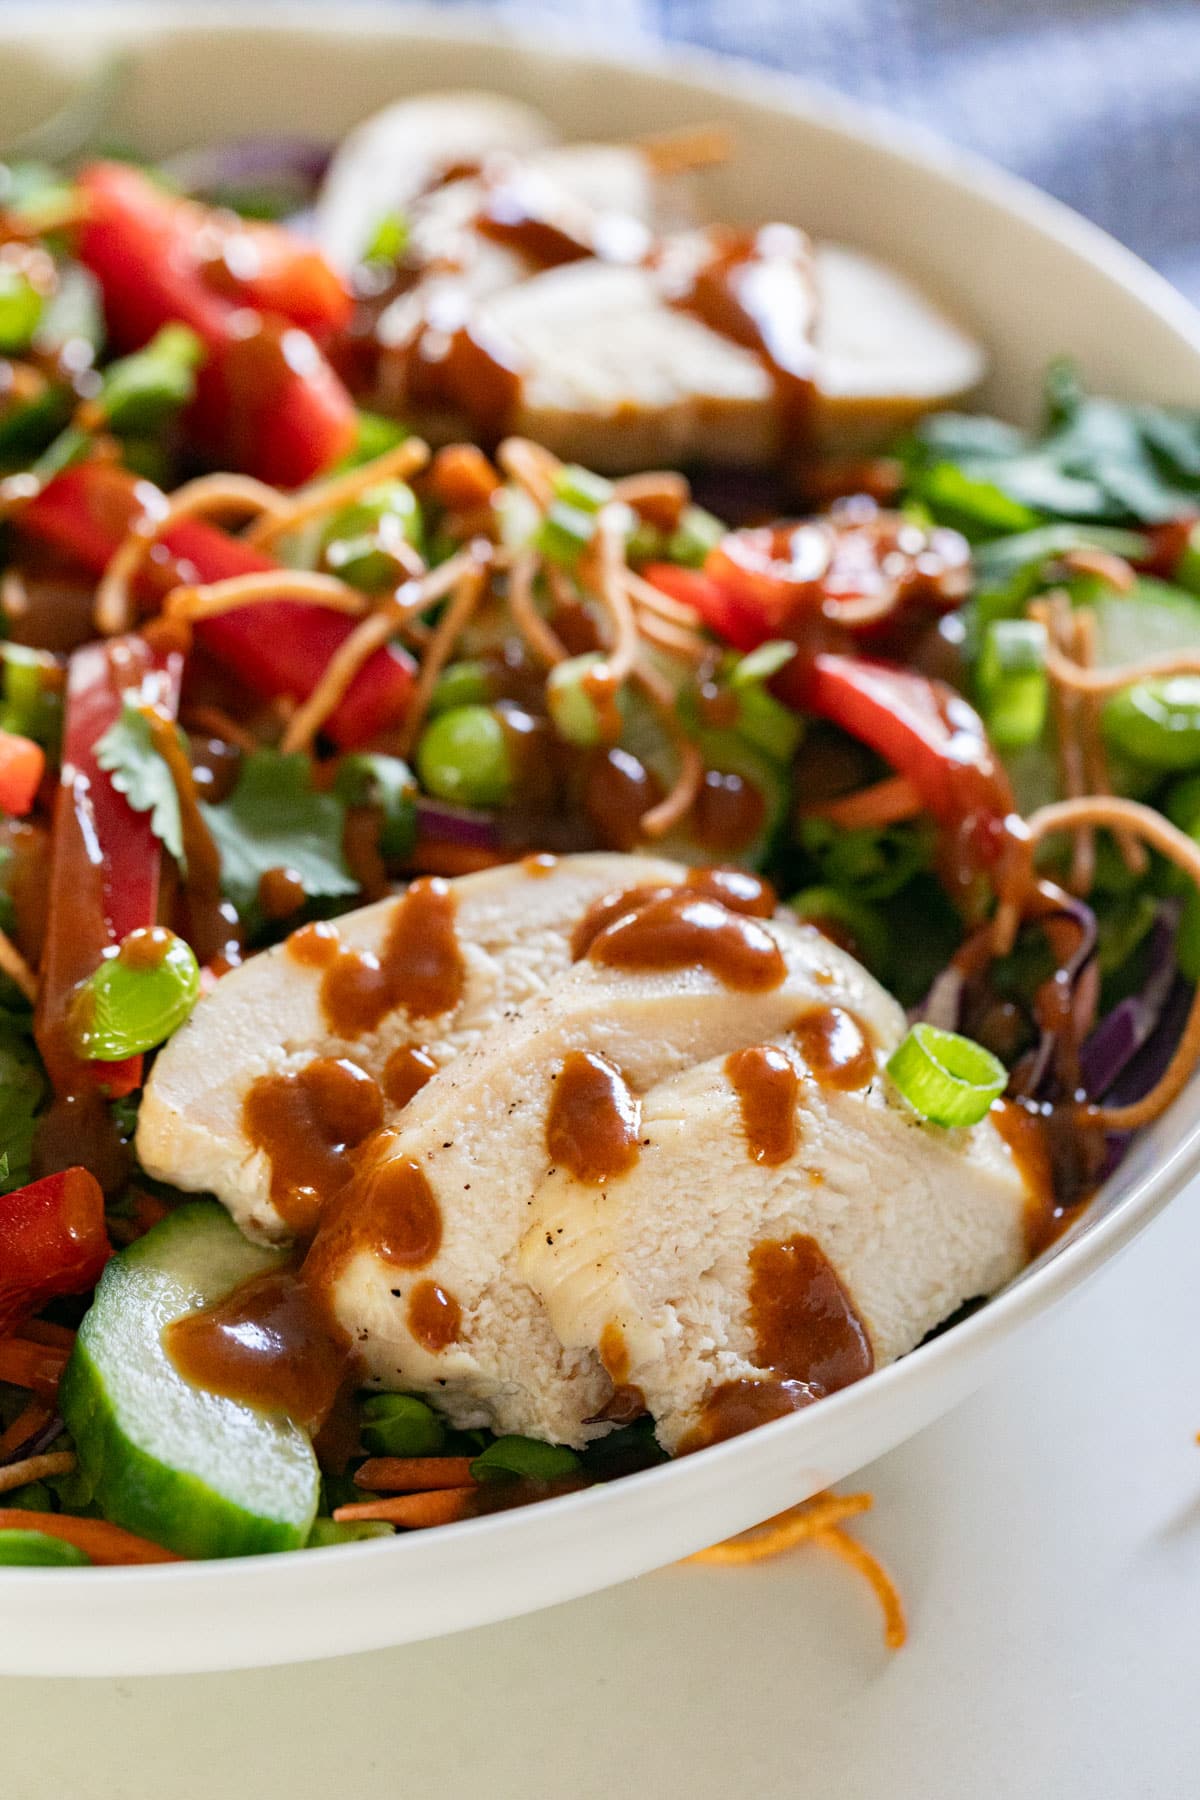 A close up image of the chicken in the Asian salad drizzled with the peanut dressing.